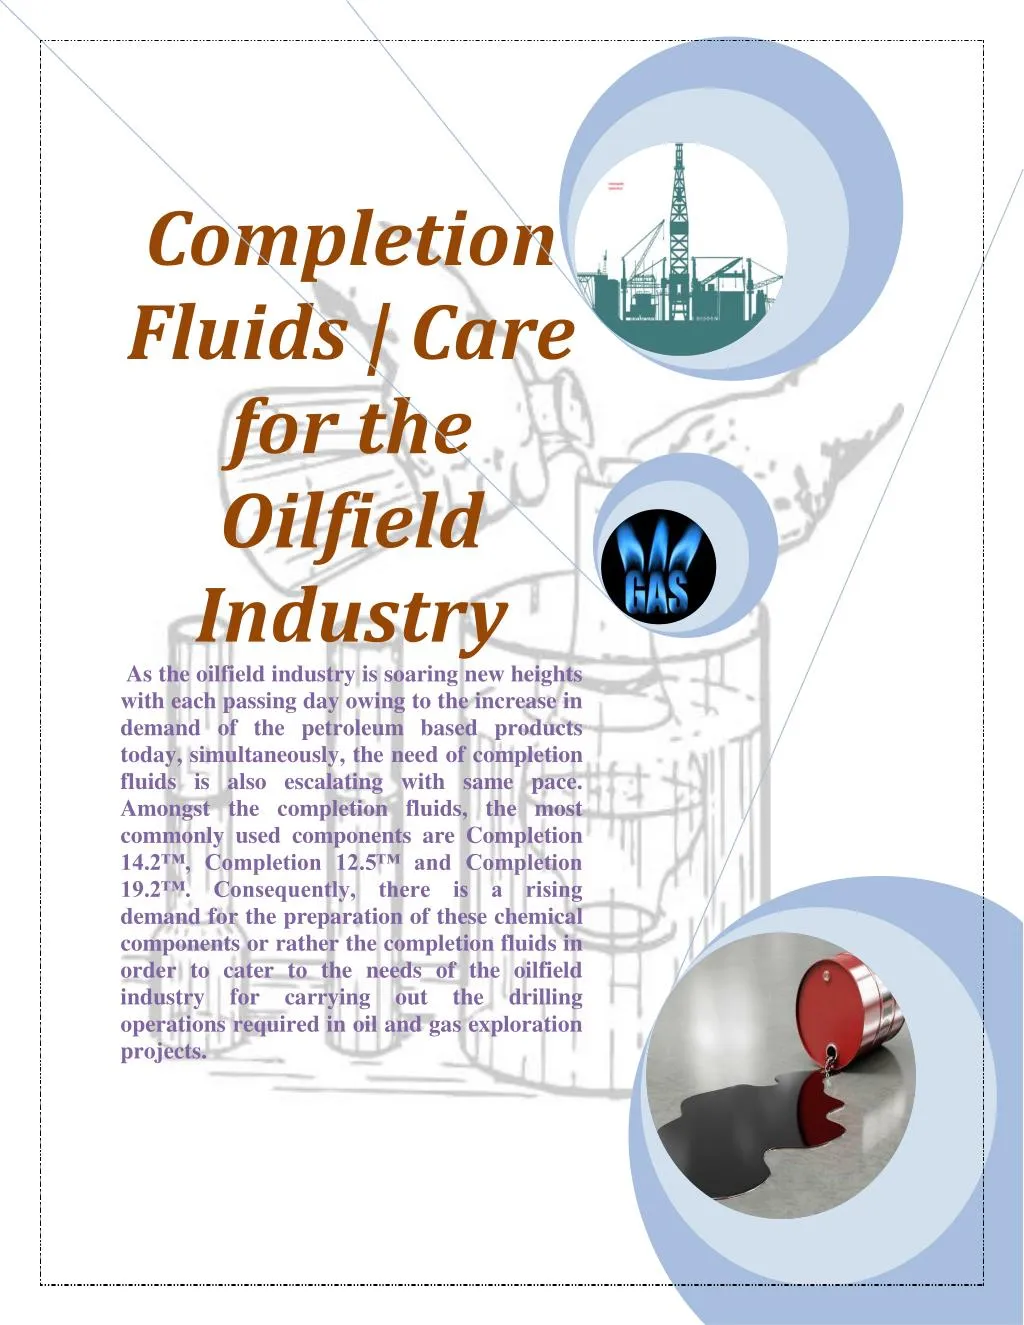 completion fluids care for the oilfield industry